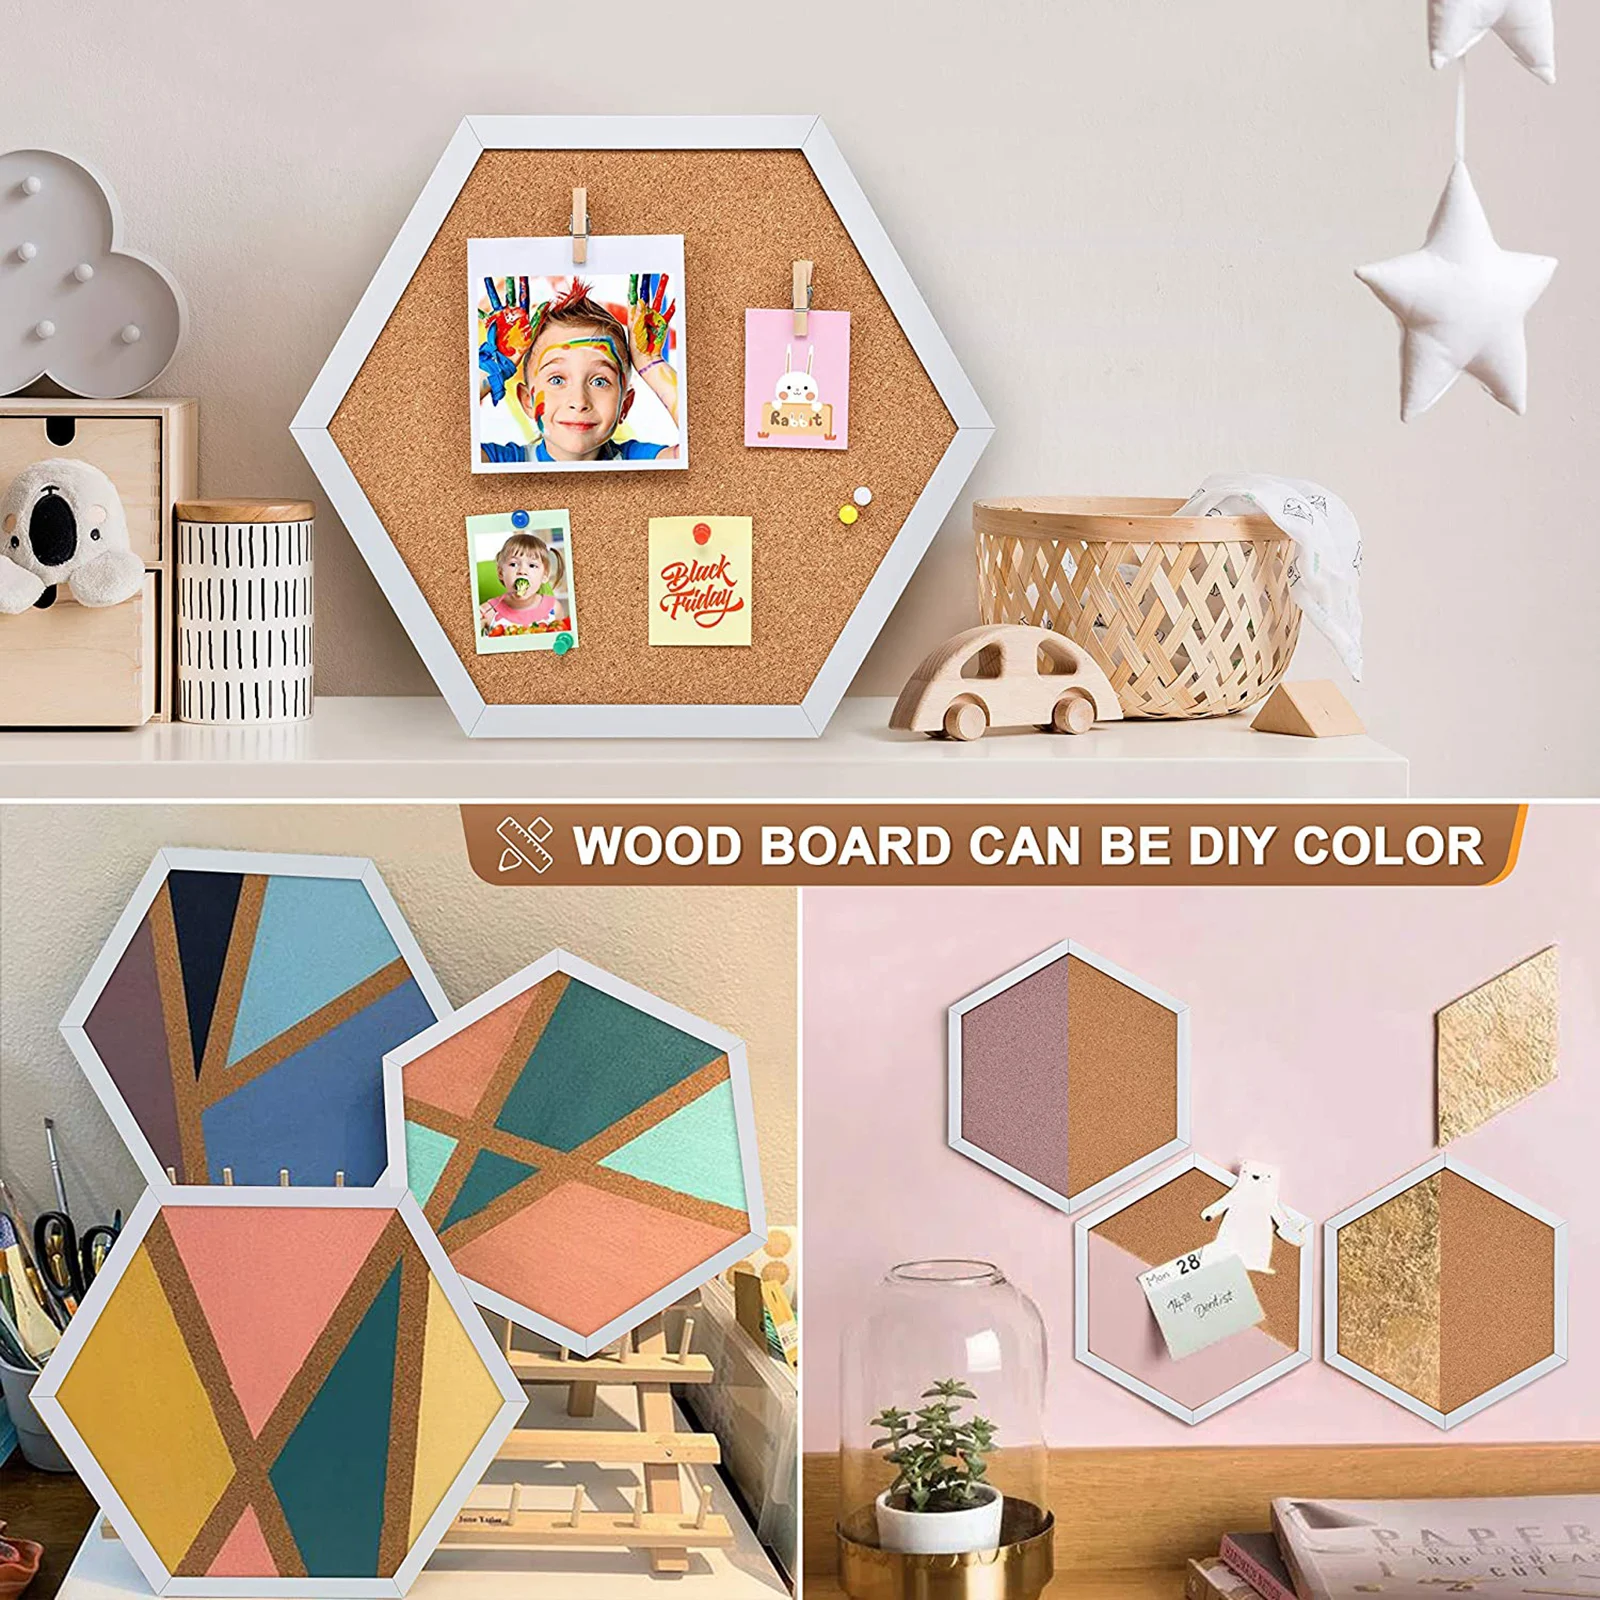 Multifunction Cork Board Office Home Wood Photo Background Hexagon Stickers Wall Message Drawing Bulletin